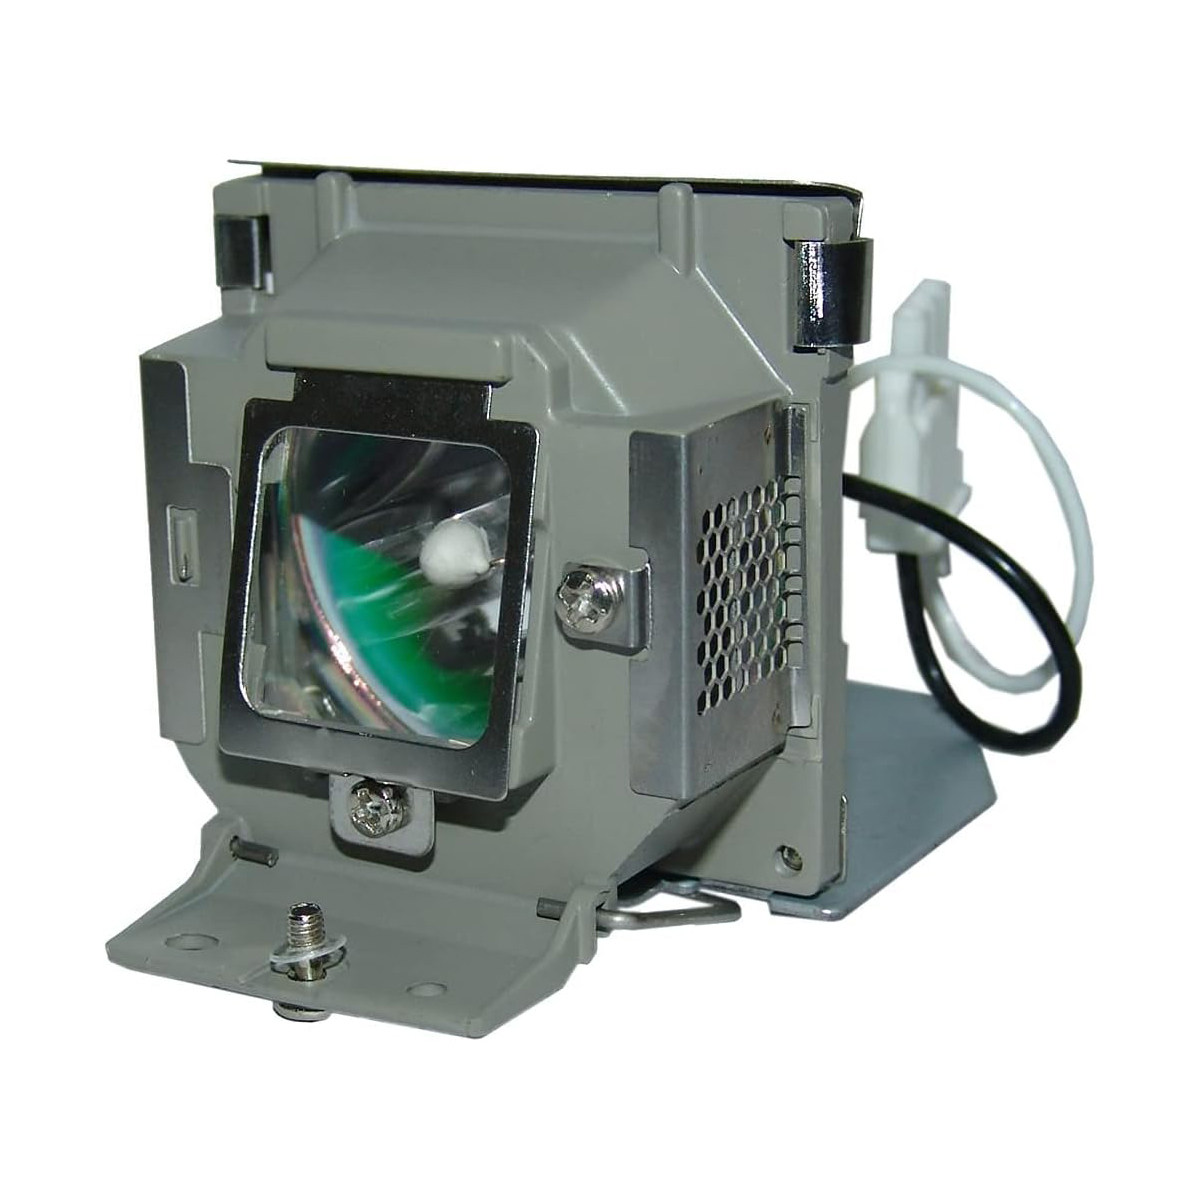 Replacement Projector lamp RLC-058 For VIEWSONICPJD5211 PJD5221